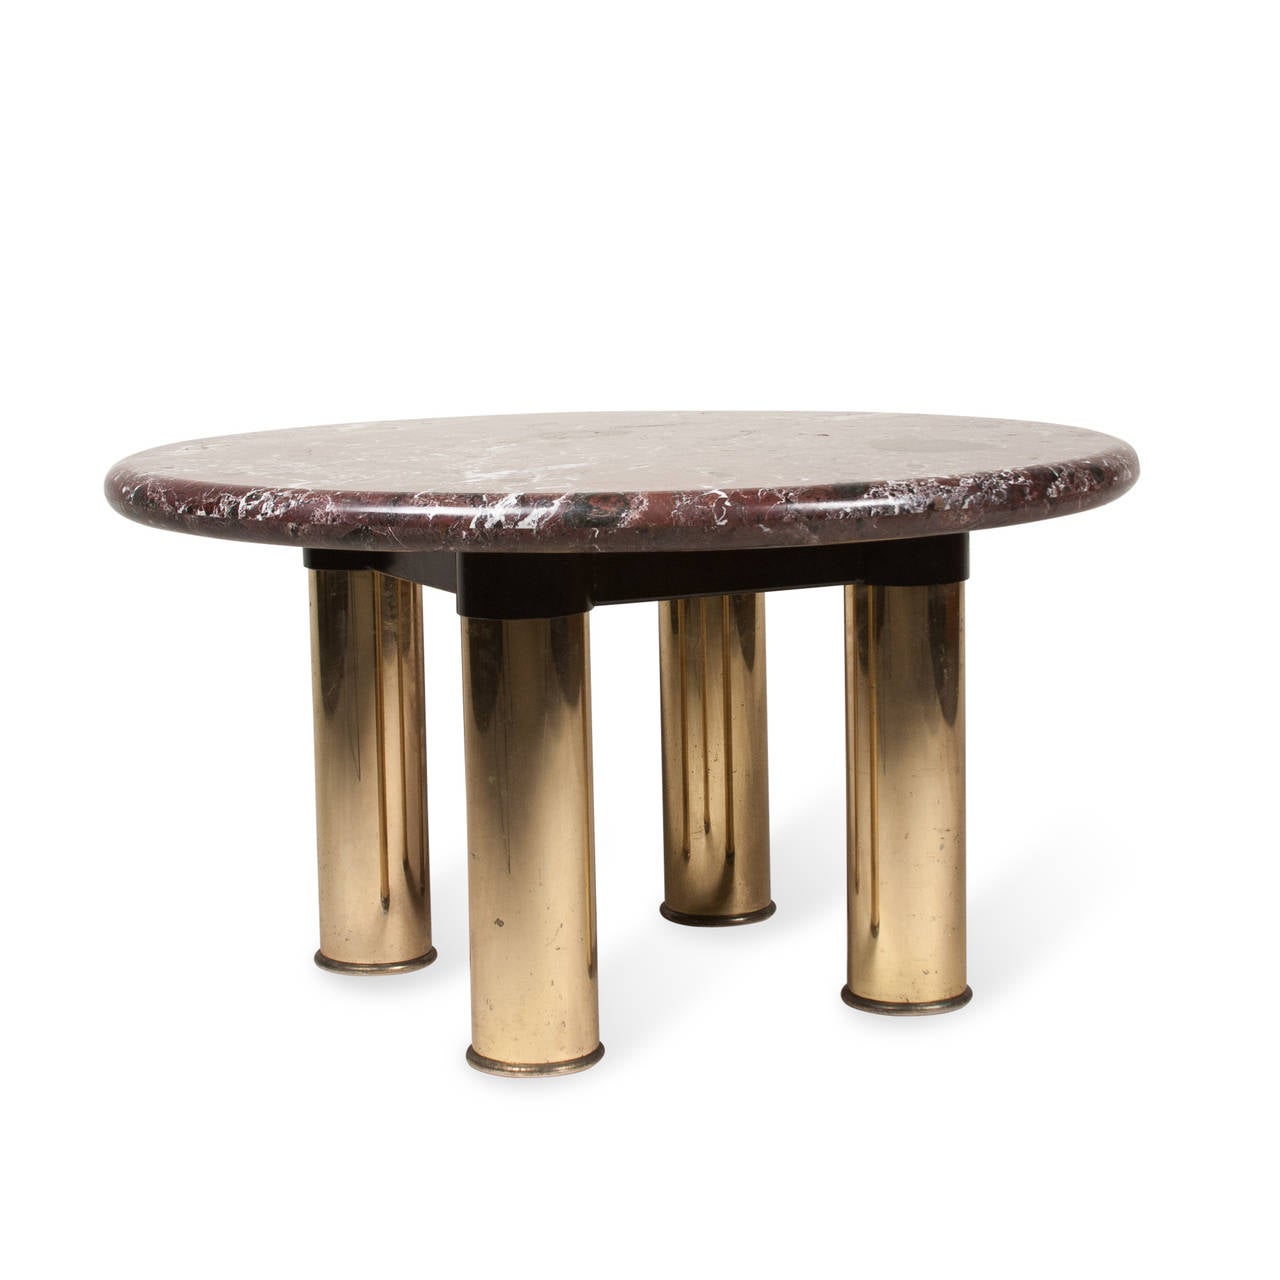 Marble circular end or side table, rounded edge, the marble mounted on four cylindrical lacquered brass legs, American, 1980s. Diameter 30 in, height 16 1/2 in. (Item #2262)